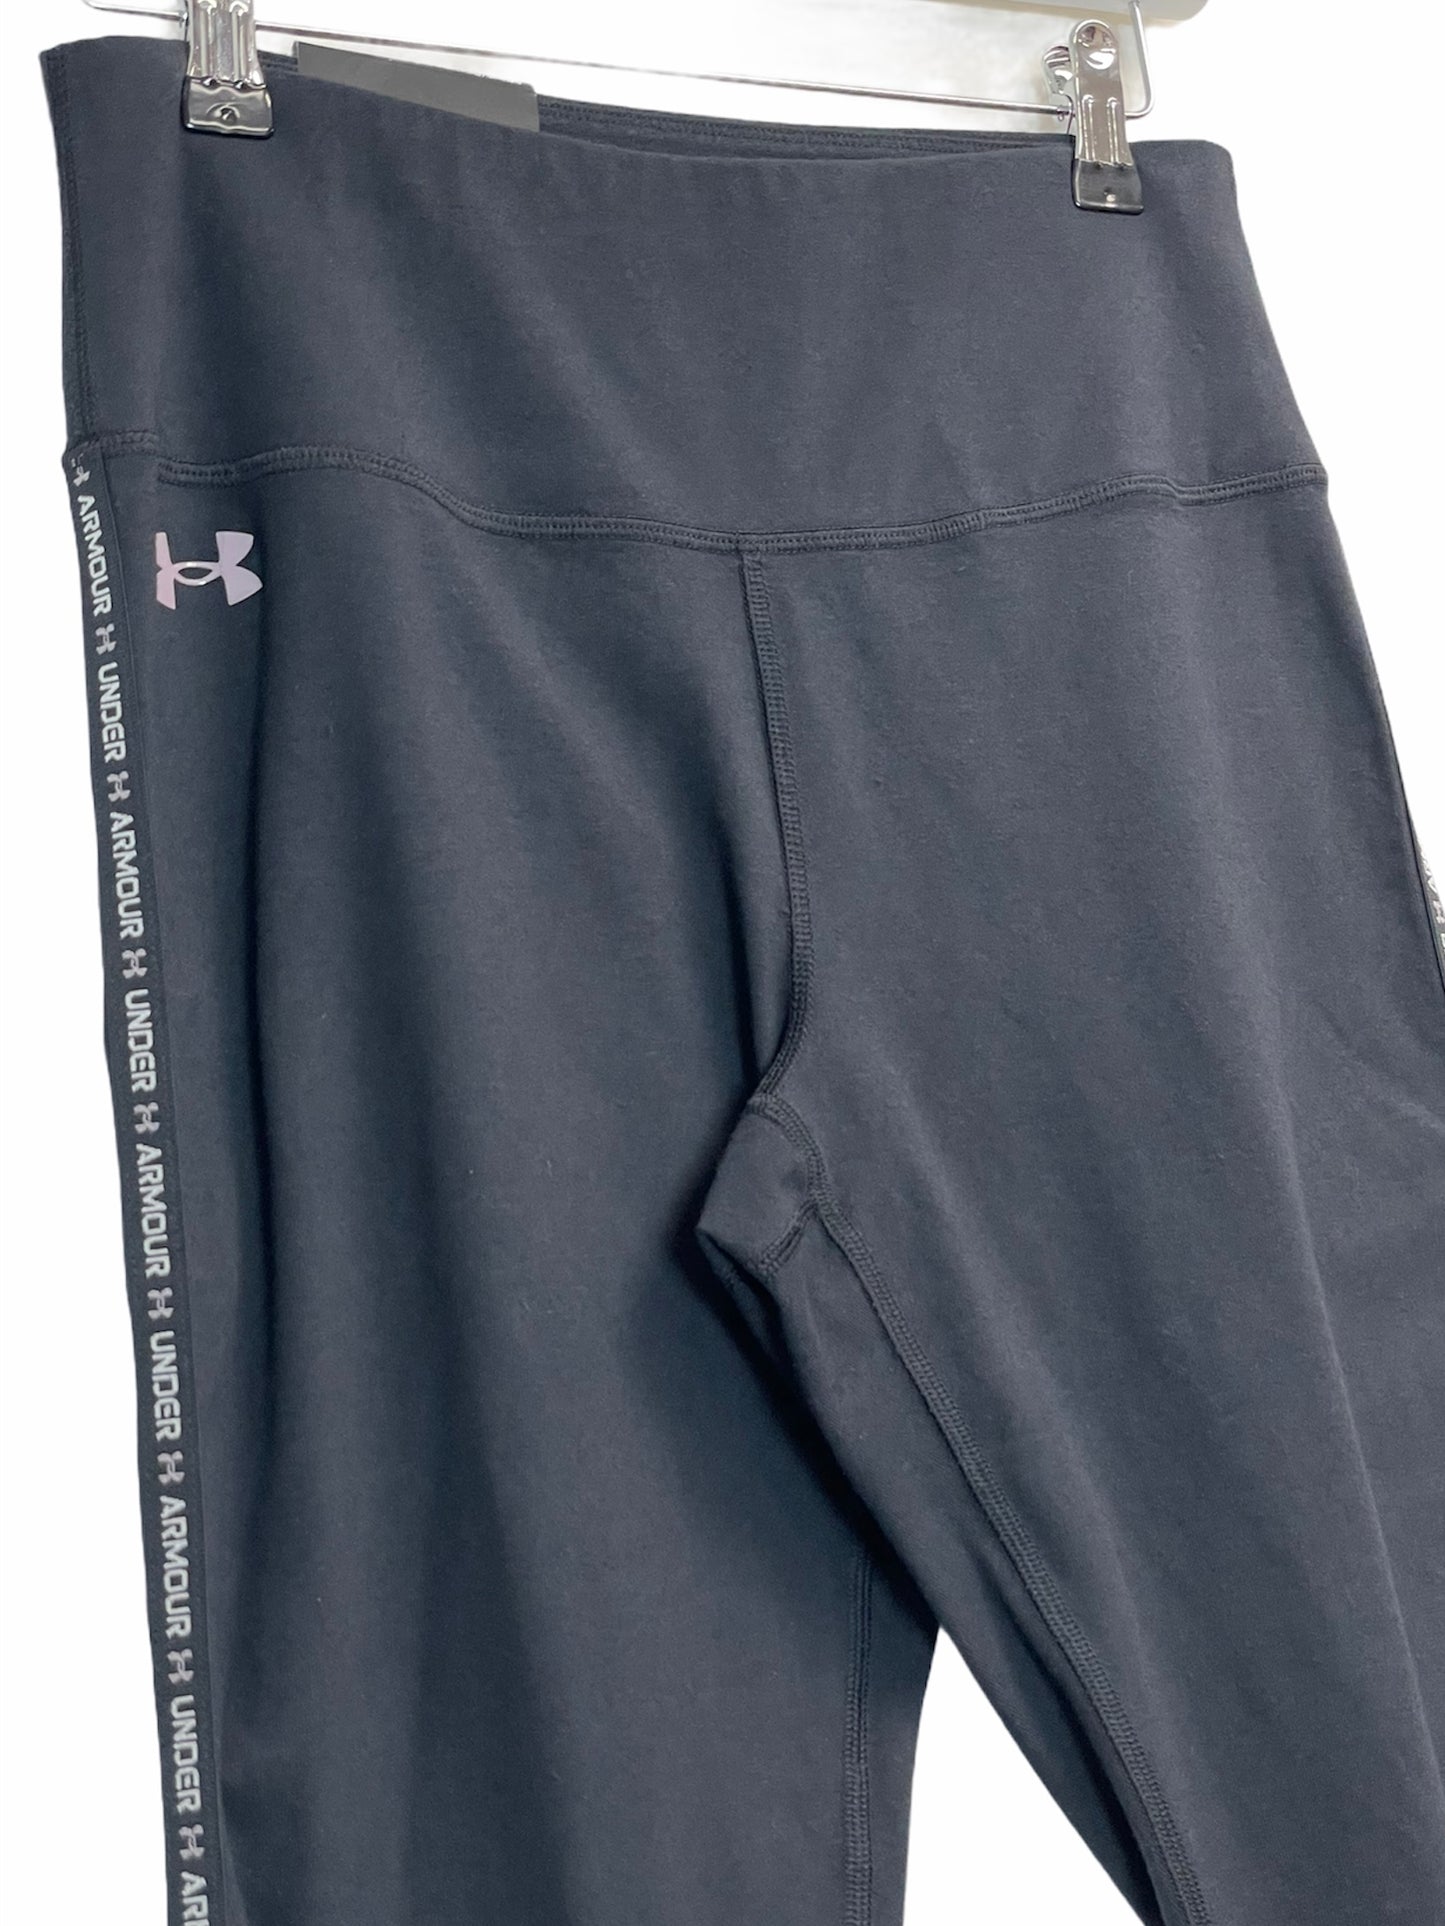 Under Armour Women's Storm Launch Gym Training Joggers in Black